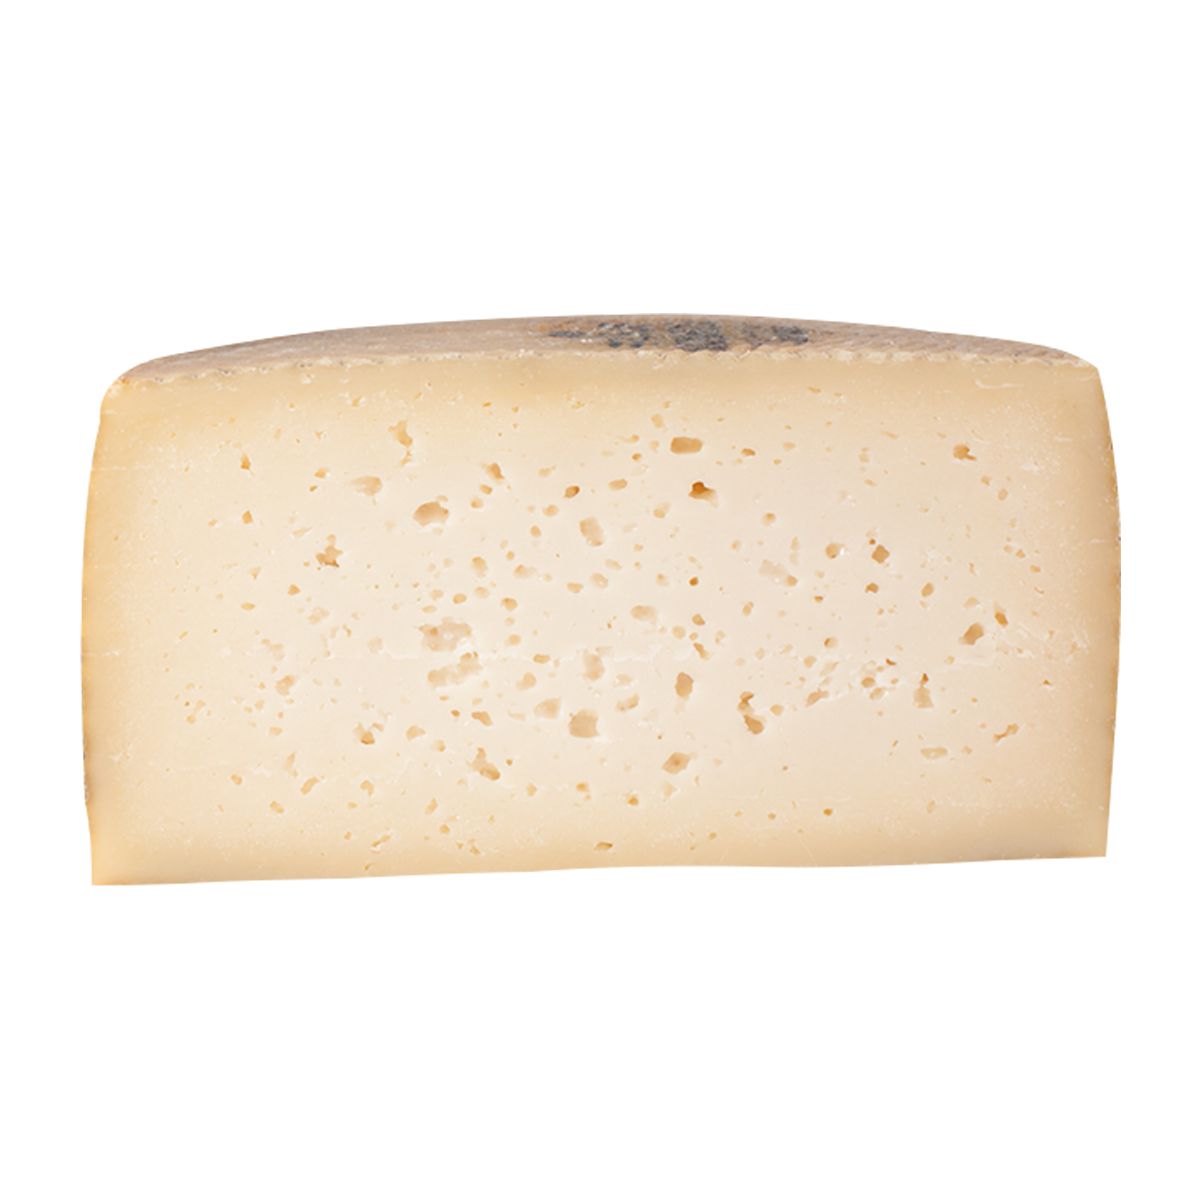 Artequeso Manchego 12 Month Aged Cheese Wheel